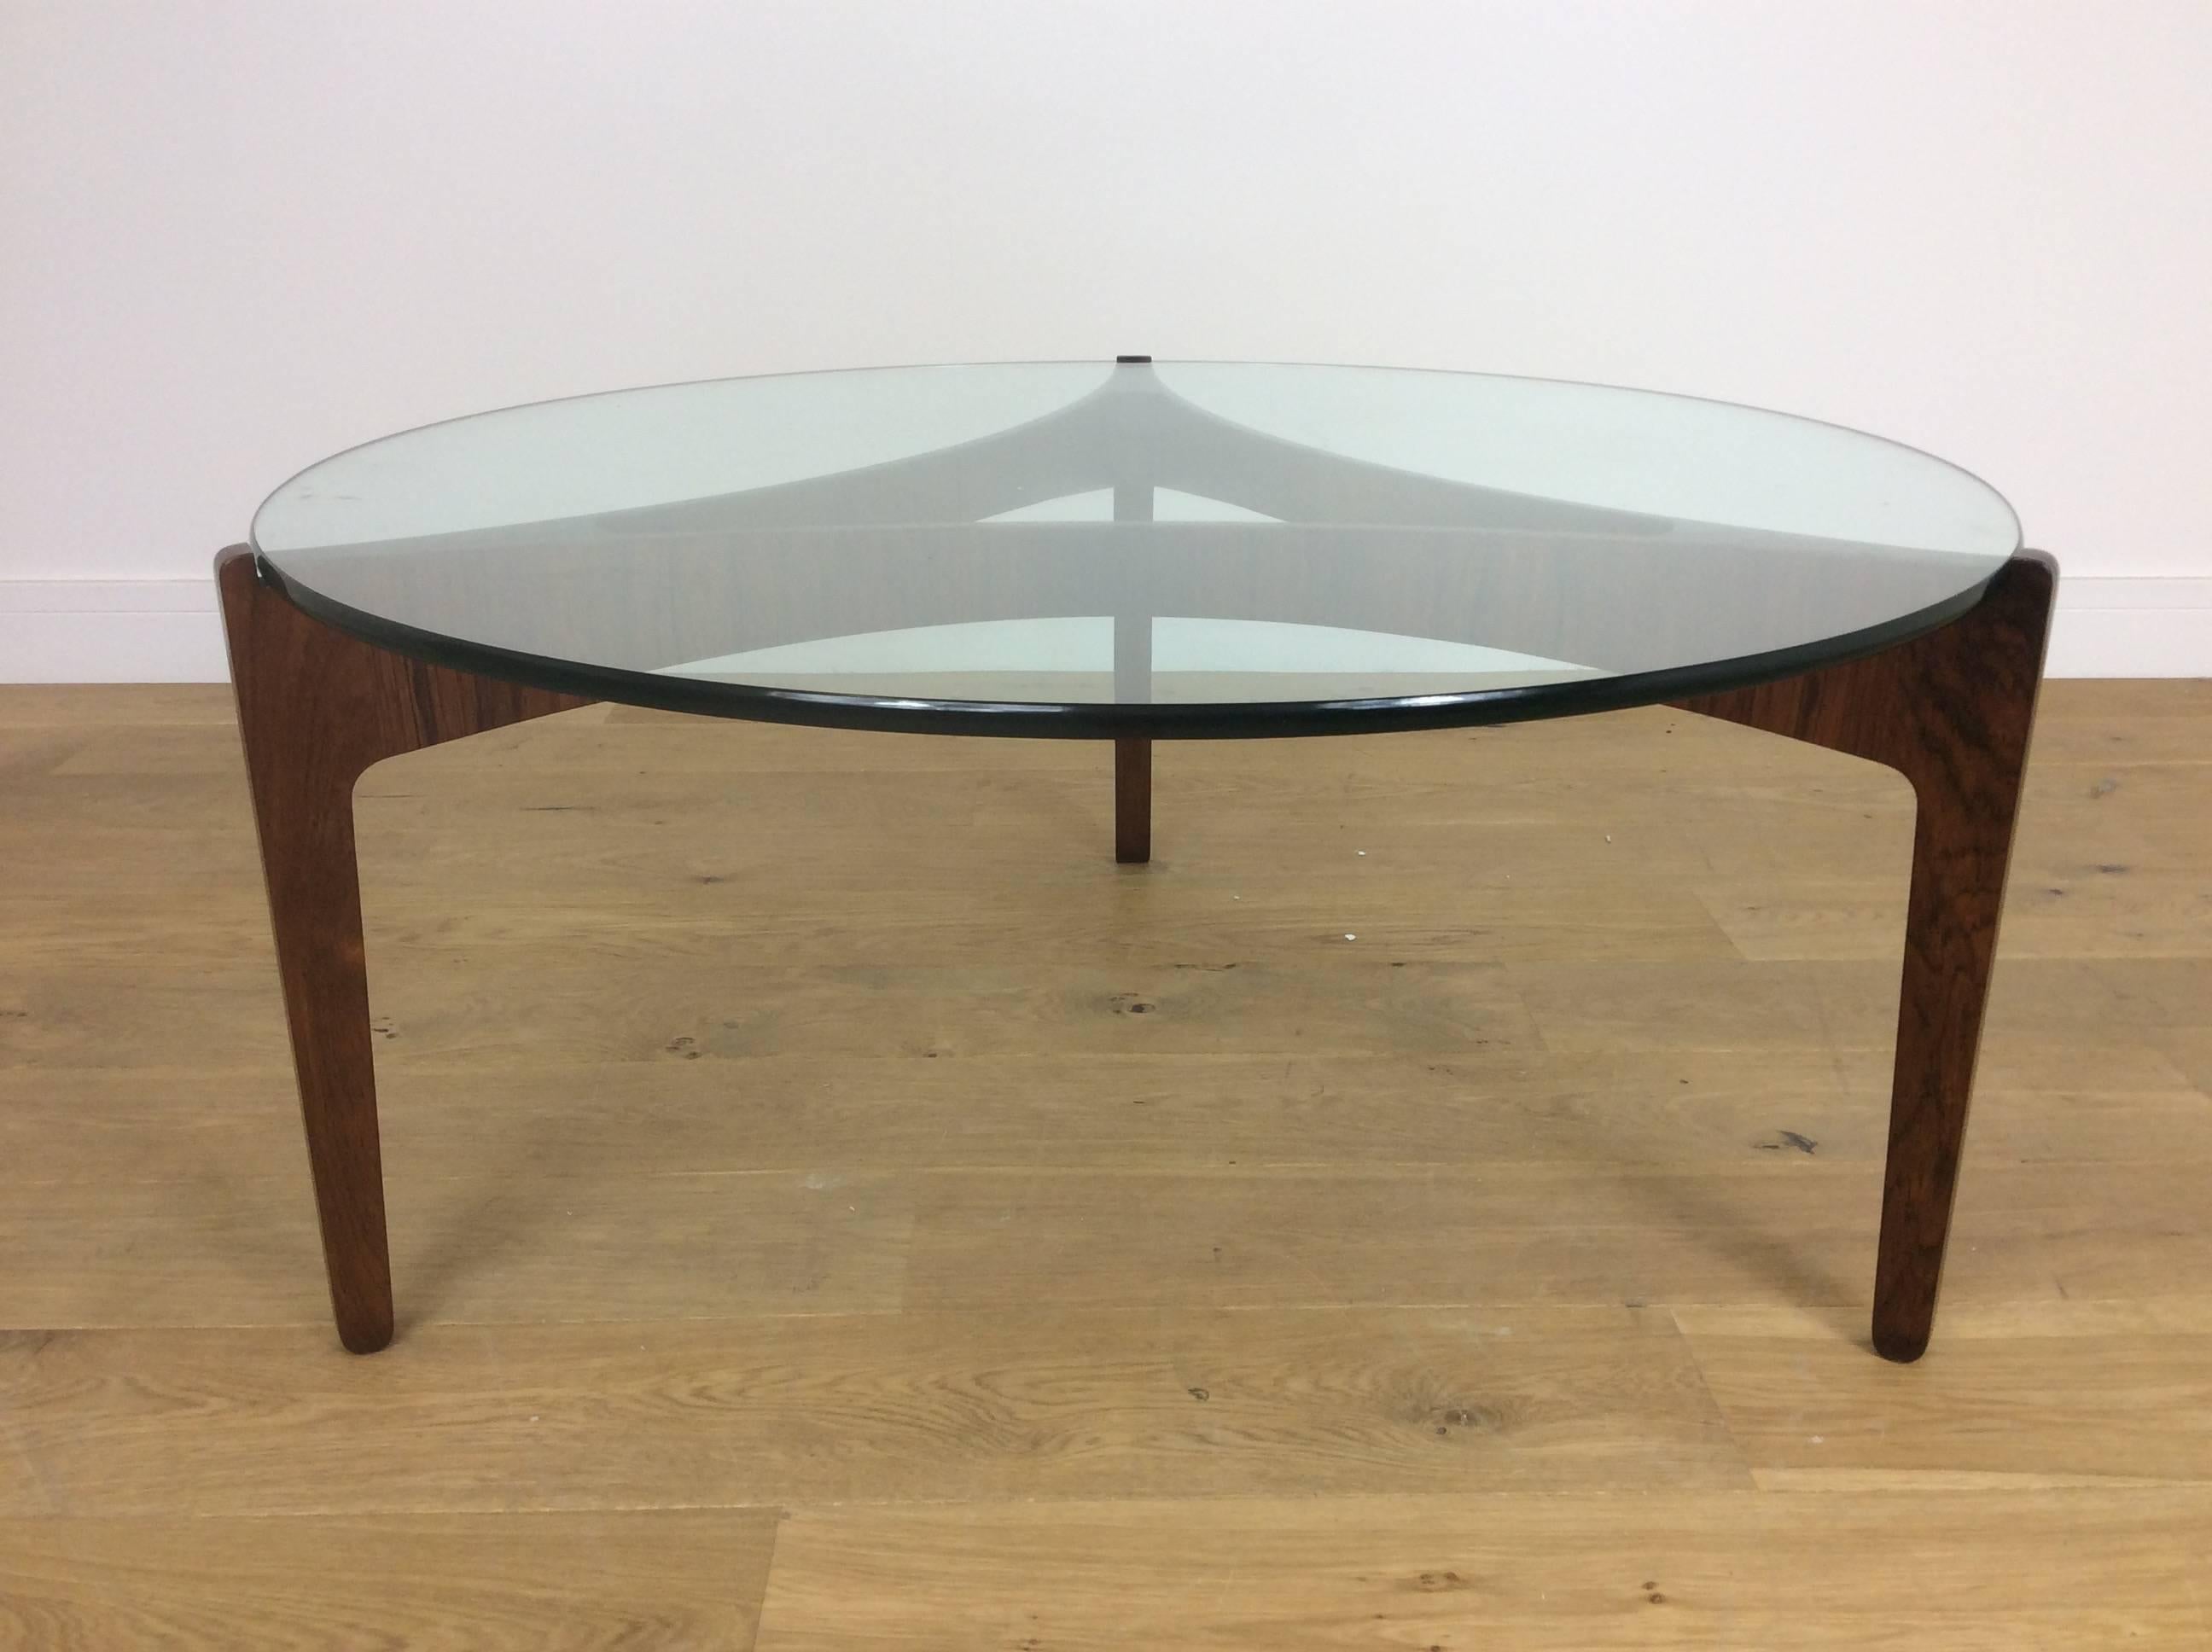 Mid-Century Modern design at its best.
Beautiful rosewood coffee table designed by Sven Ellekaer, 1961, produced by Christian Linneberg.
This design was used on the James Bond Movie 